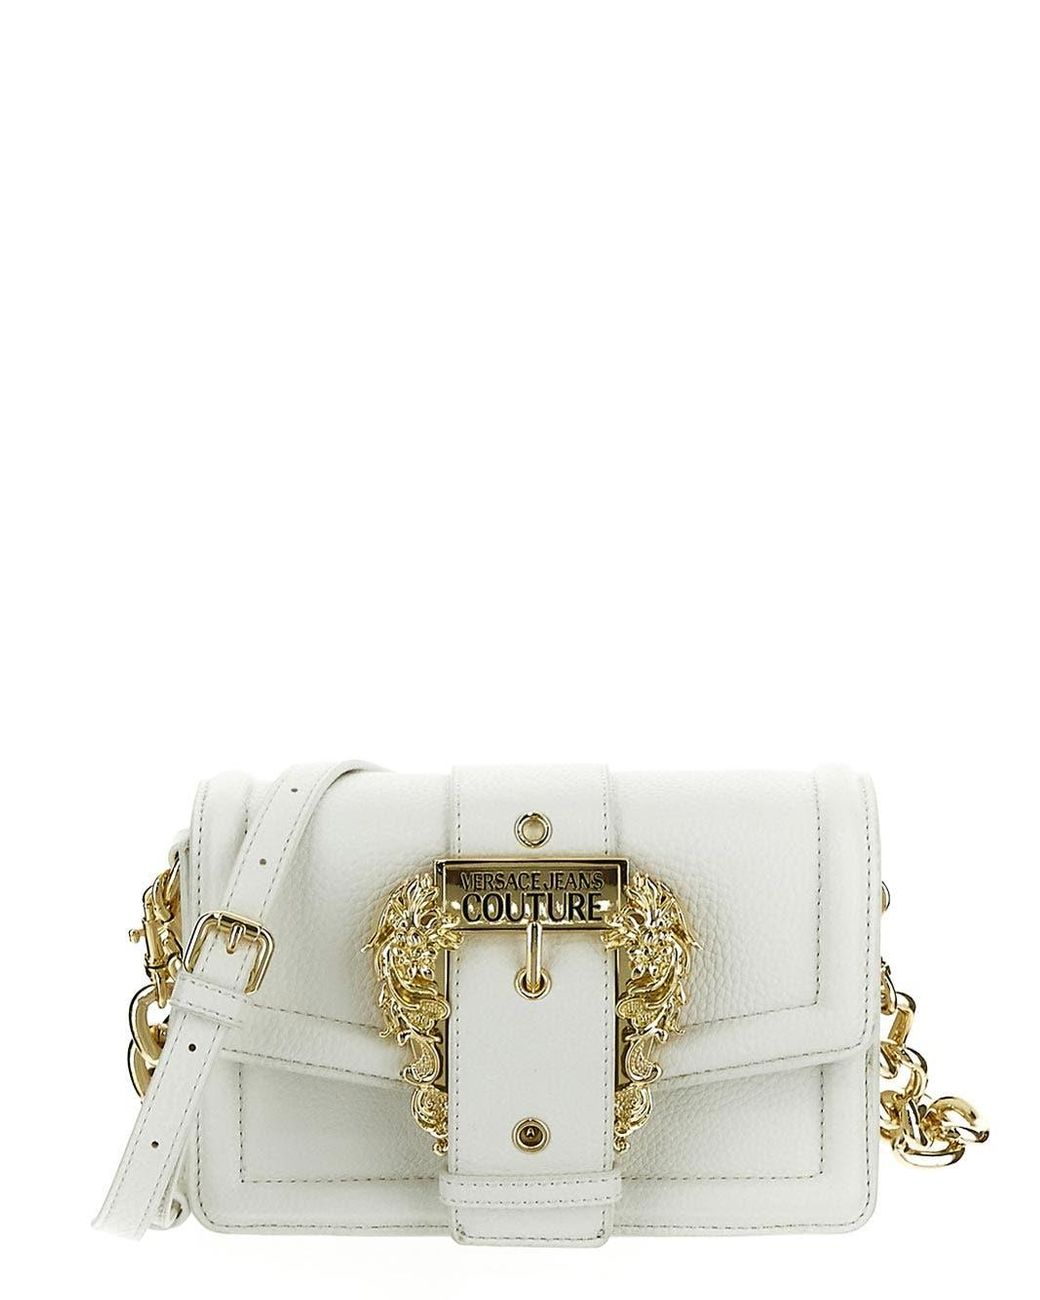 Versace Jeans Couture Baroque Buckle Shoulder Bag in White | Lyst